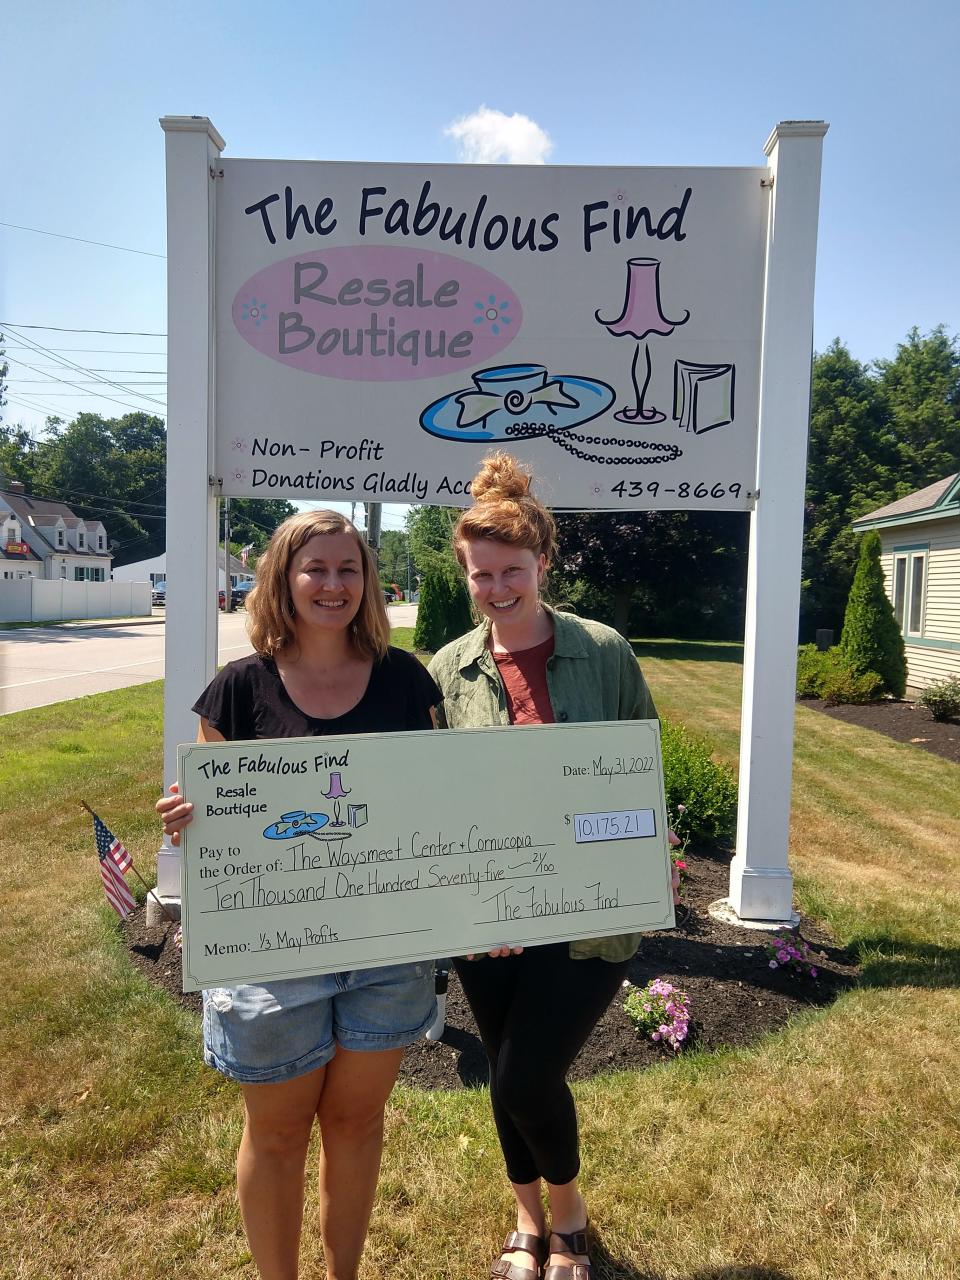 Alissa Megee, the Administrative Manager at The Waysmeet Center, and Avary Thorne from The Waysmeet Center Board of Directors, receiving the check for this very generous donation from The Fabulous Find.